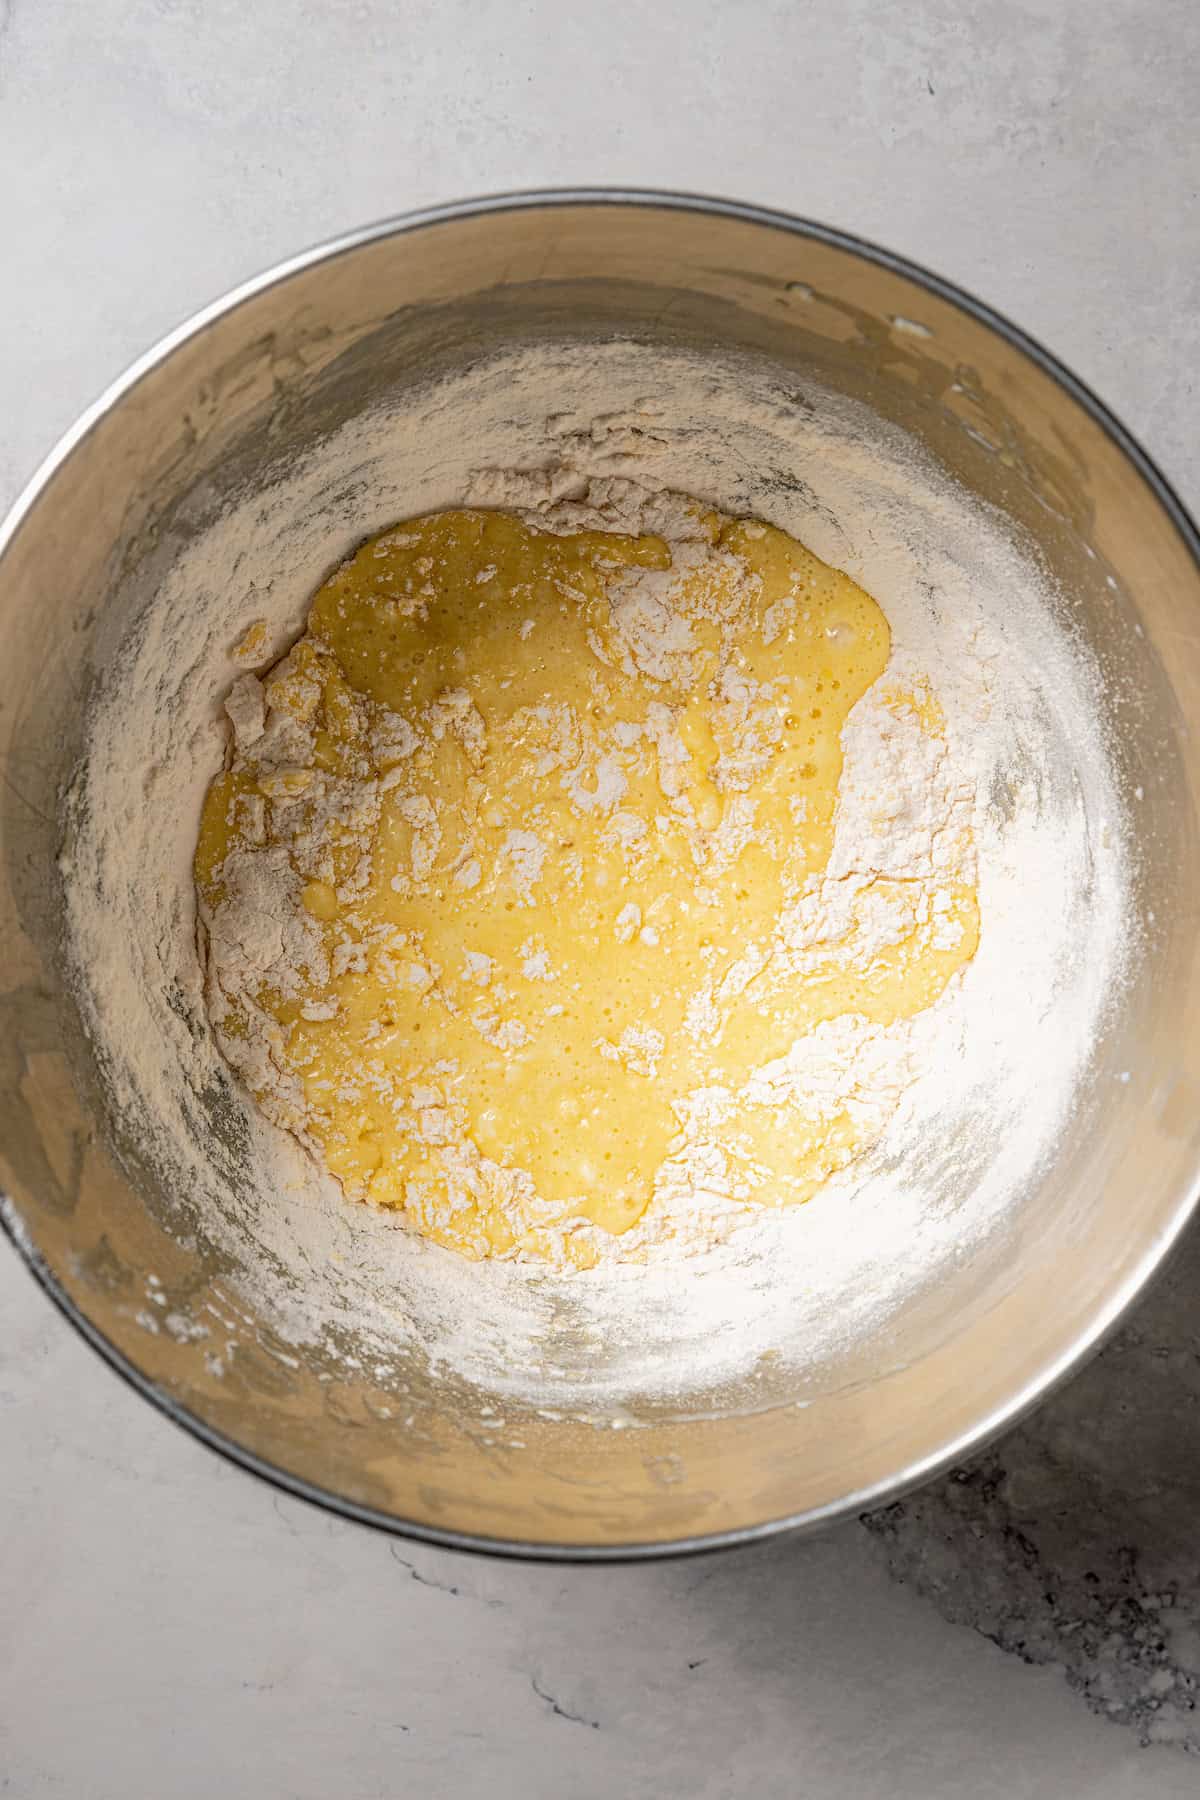 Dry ingredients partially incorporated into the wet cake batter in a metal bowl.